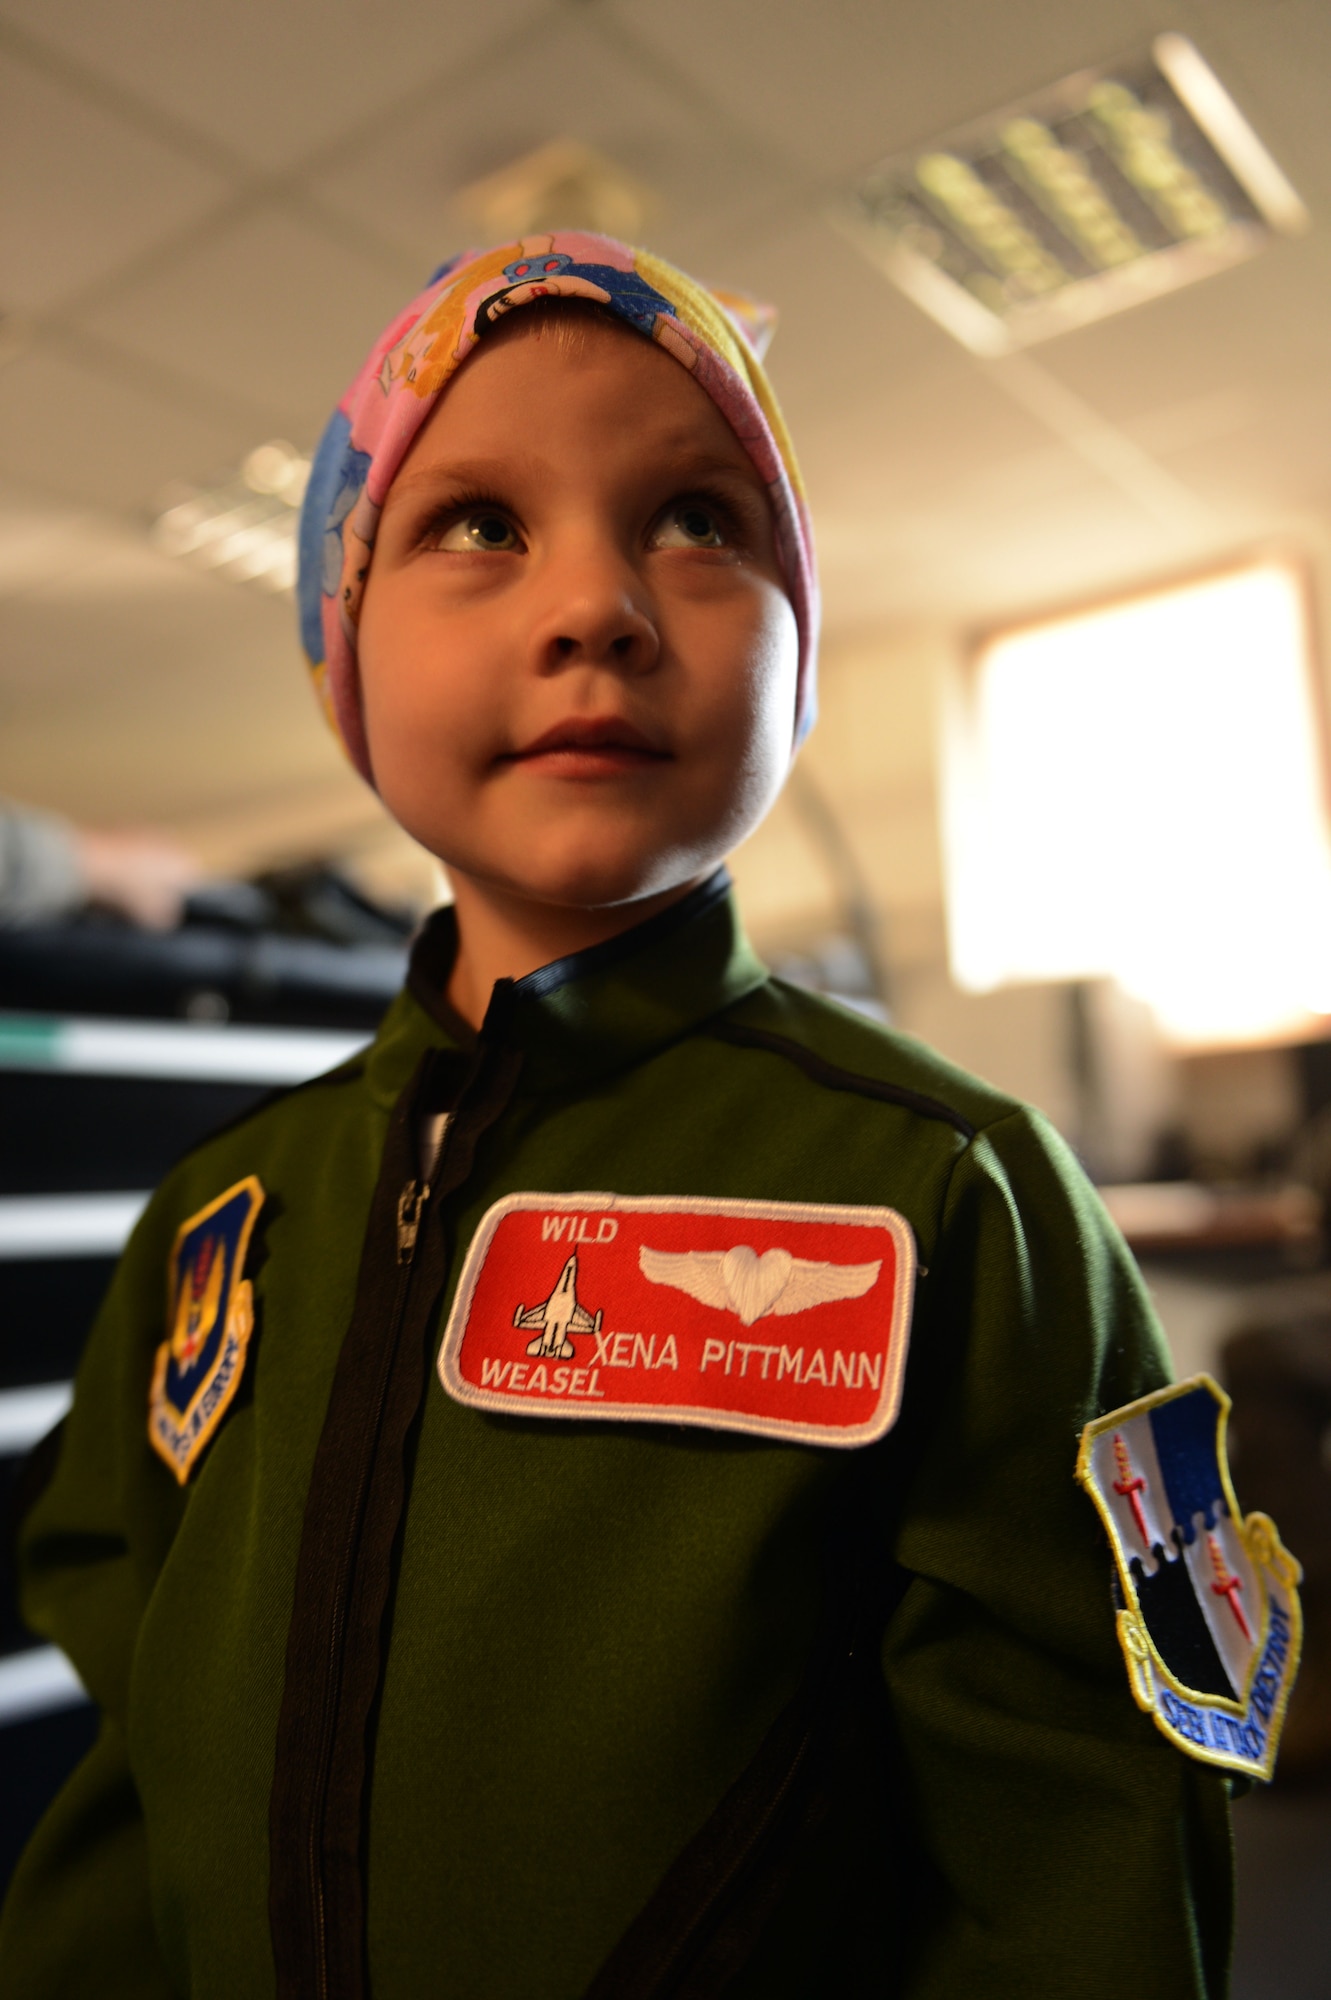 SPANGDAHLEM AIR BASE, Germany – Sarah Pittman, 4, poses for a photo at the 480th Fighter Squadron Aug. 16, 2013. Sarah and another child recovering from leukemia toured the 480th FS and were given flightsuits with callsigns before viewing an F-16 Fighting Falcon fighter aircraft. (U.S. Air Force photo by Airman 1st Class Gustavo Castillo/Released)